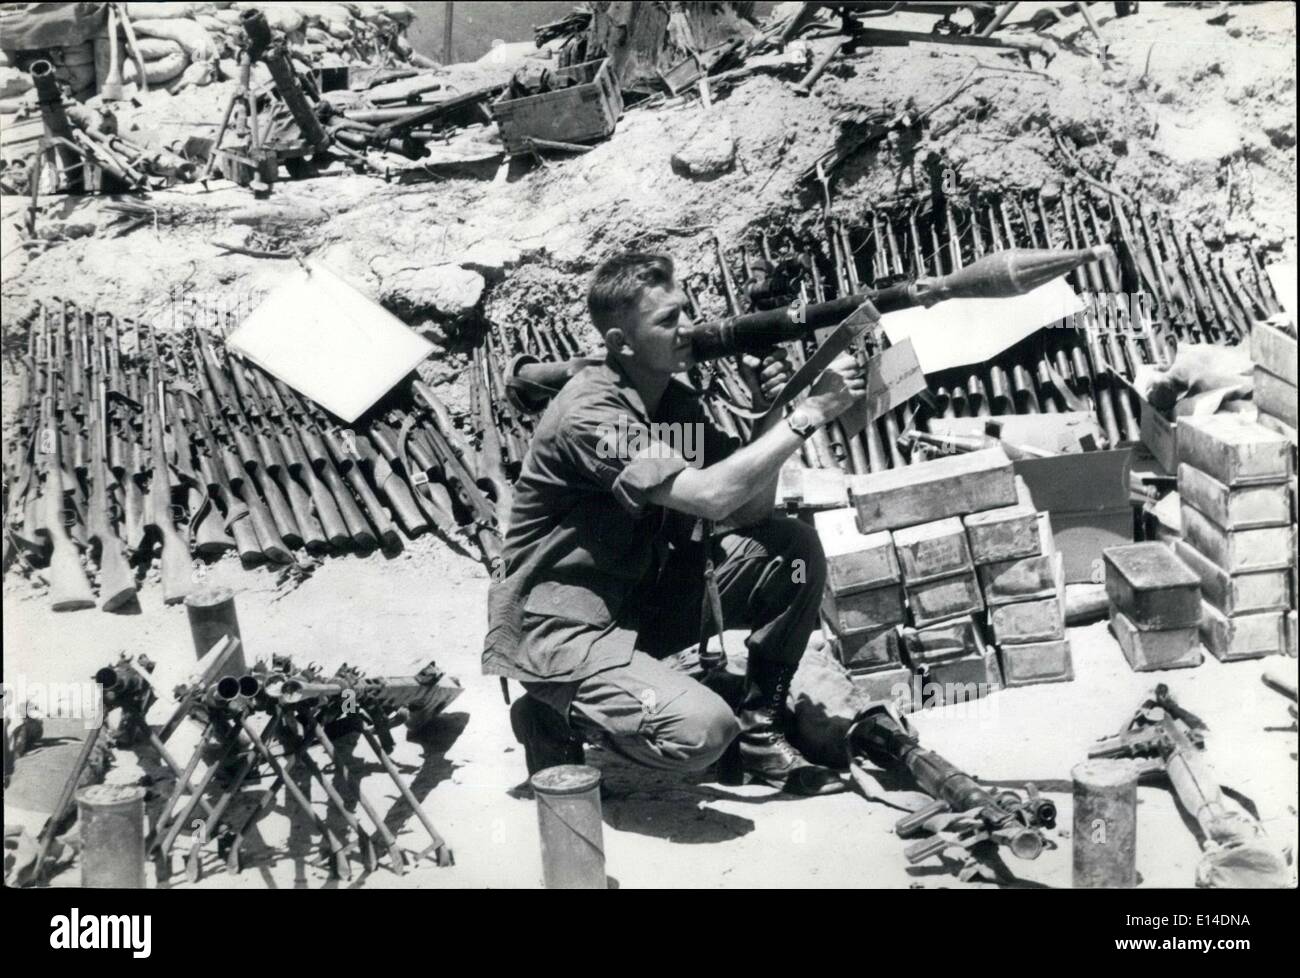 Apr. 18, 2012 - Big arms capture in Vietnam: Part of a large weapons cache captured by en of he US 327th Infantry Regiment. 101st Airborne Division during a sweep against North Vietnamese led by Lt. Col. ''Charging'' Charlie Beckwith, a battalion commander. Stock Photo